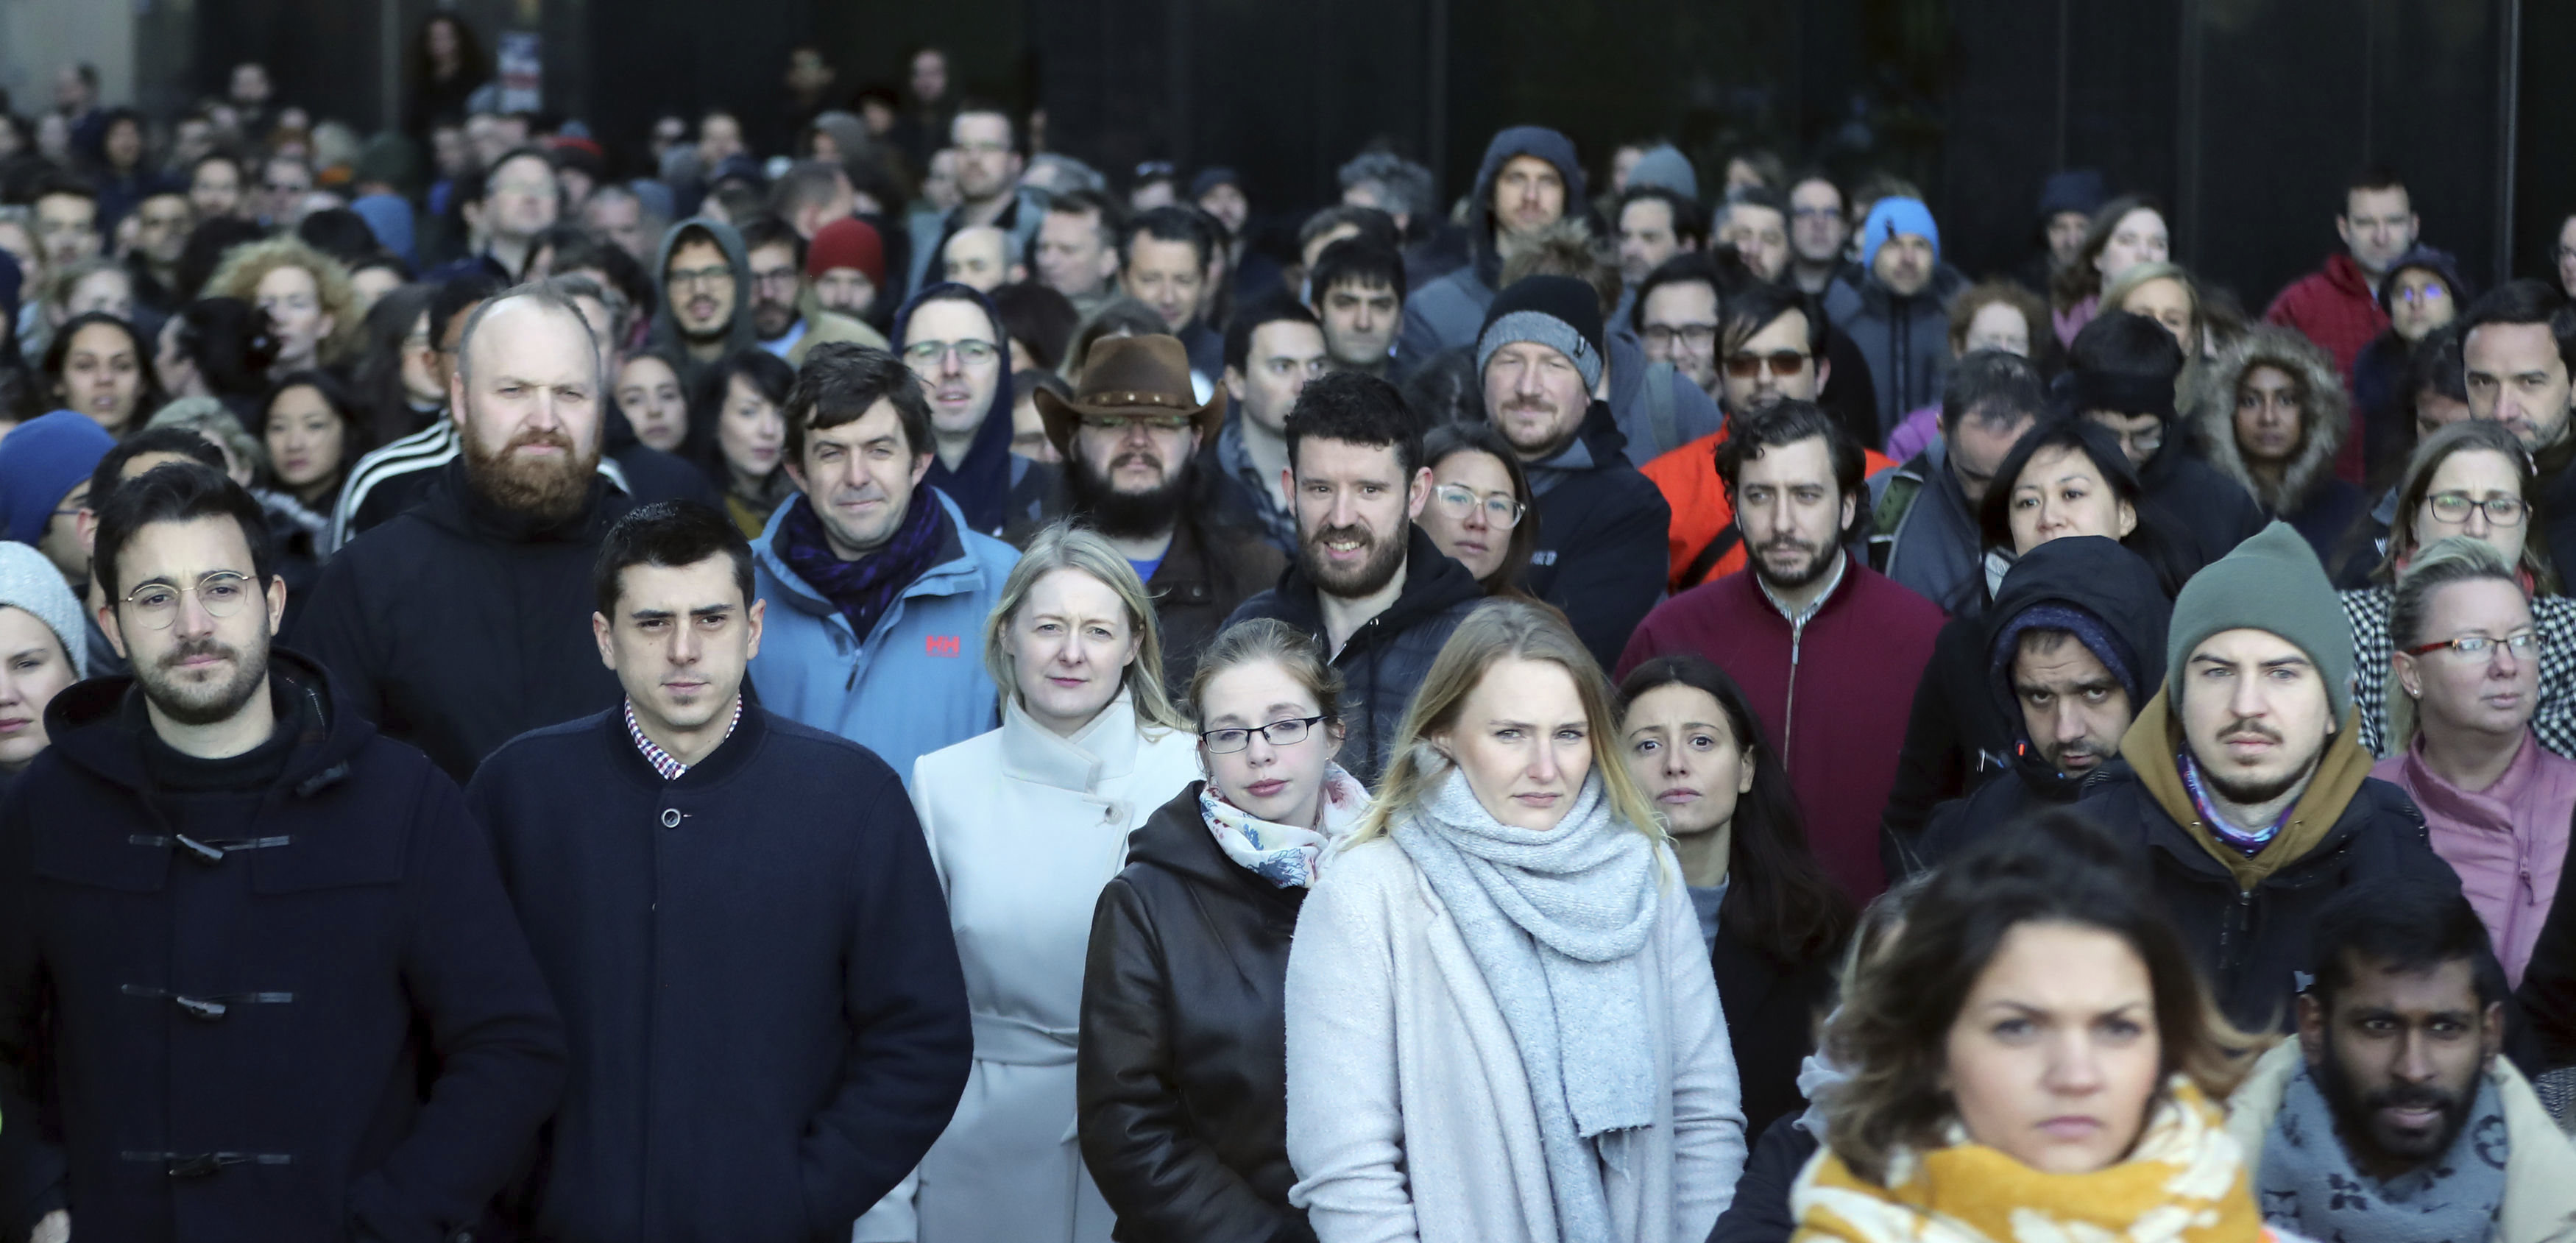 Google Employees Walk Out to Protest Treatment of Women